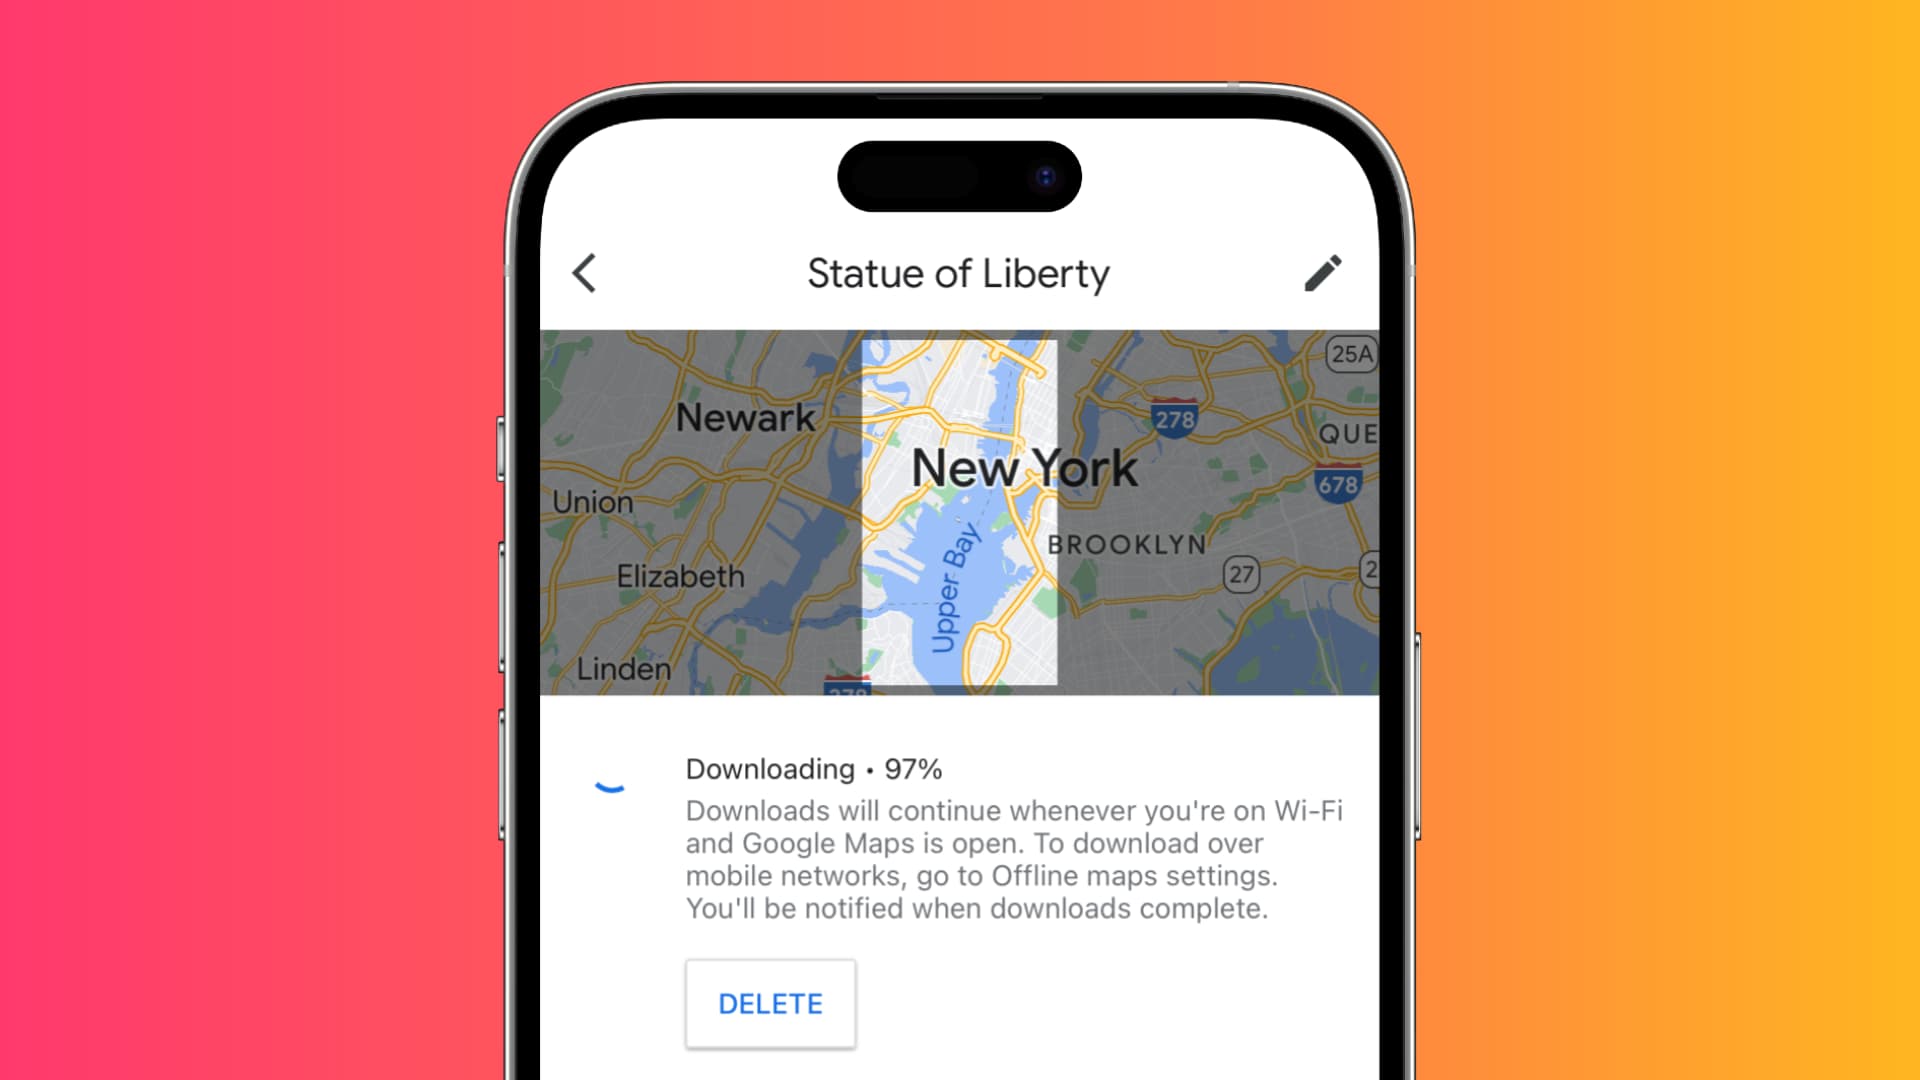 Offline map of Statue of Liberty downloading inside Google Maps on iPhone